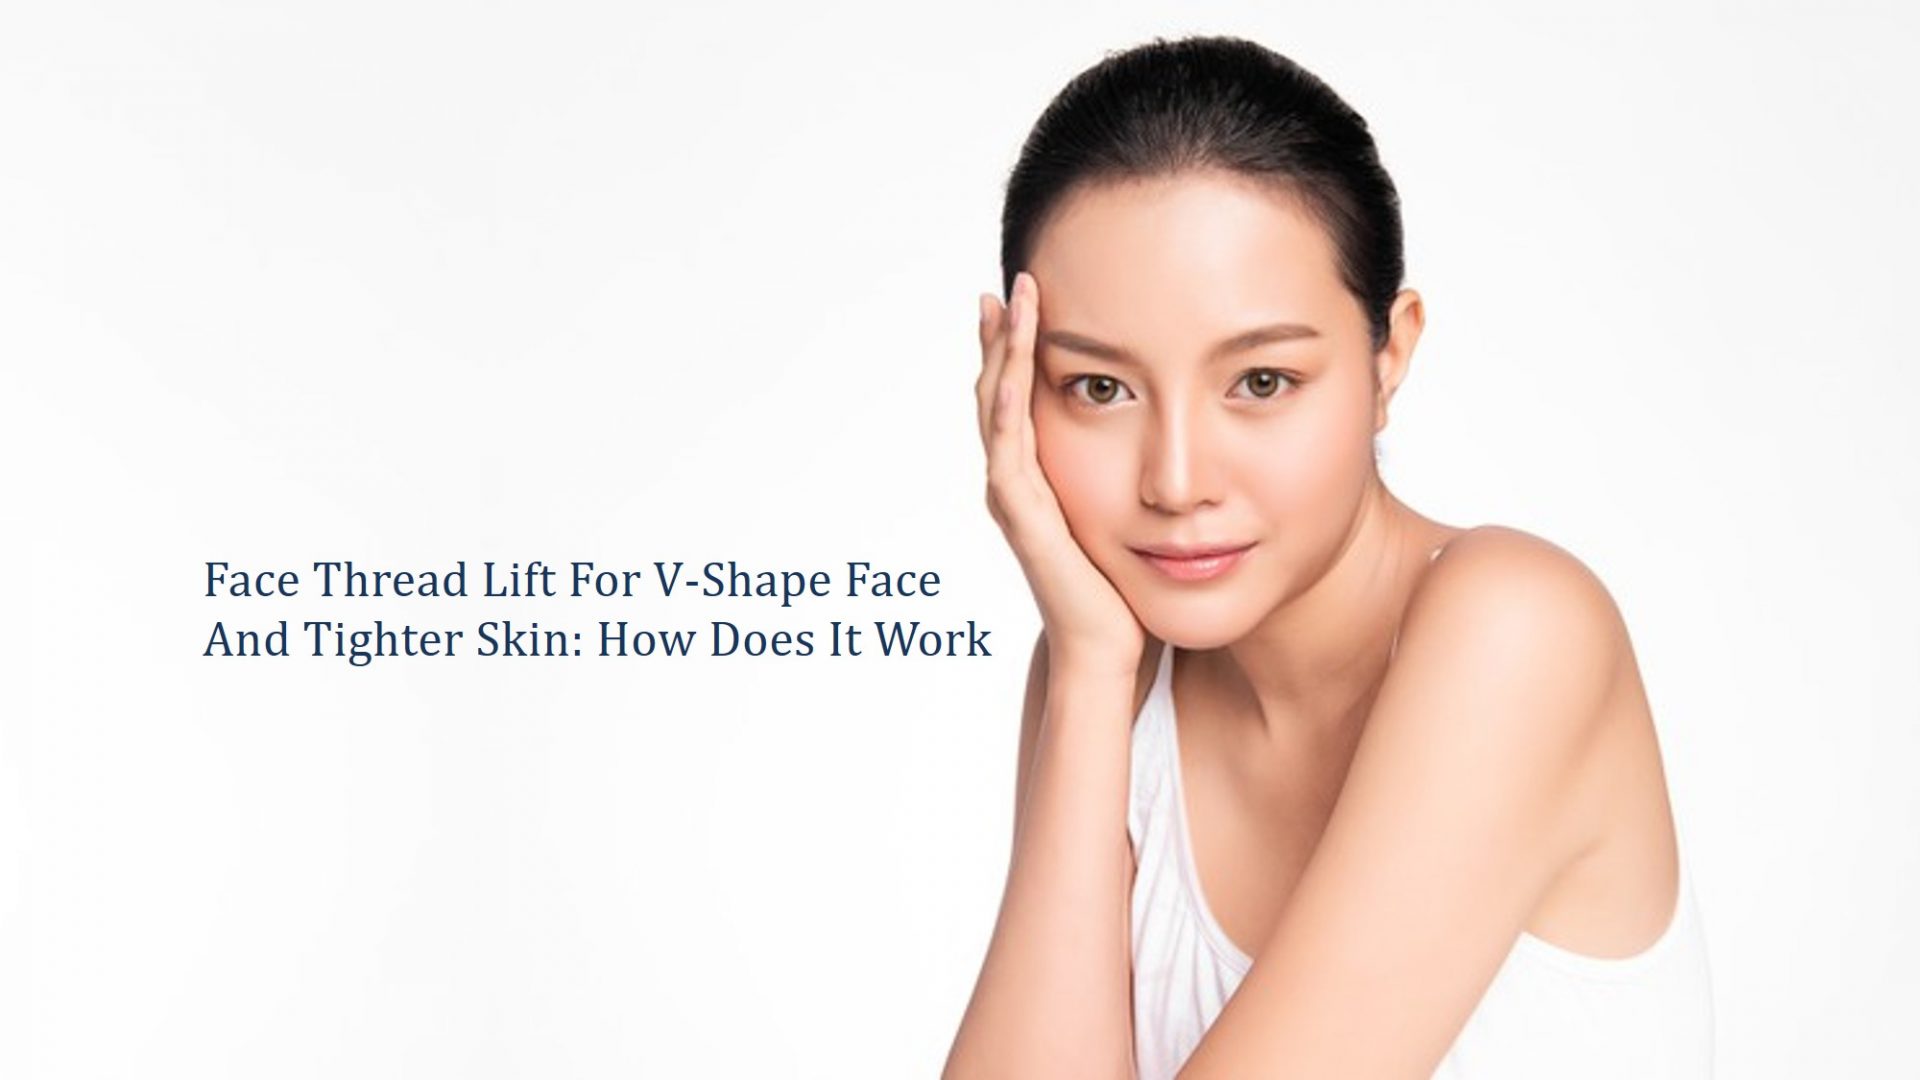 Face Thread Lift For V-Shape Face And Tighter Skin: How Does It